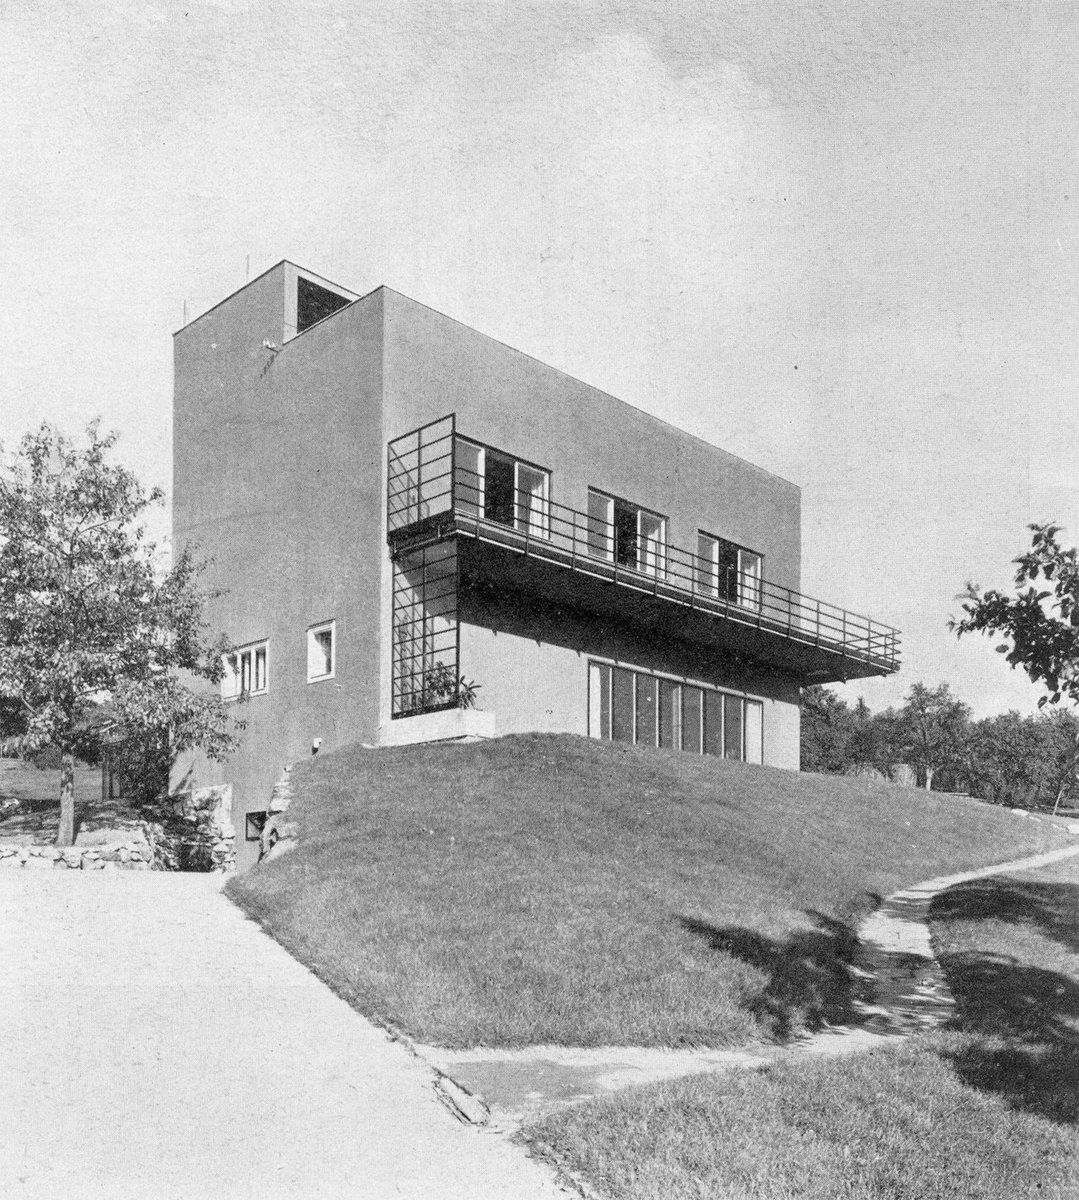 House for two young men, Otto Eisler, Brno, Czechoslovakia, 1931. 
#architecture #archinerds buff.ly/42uwWnK